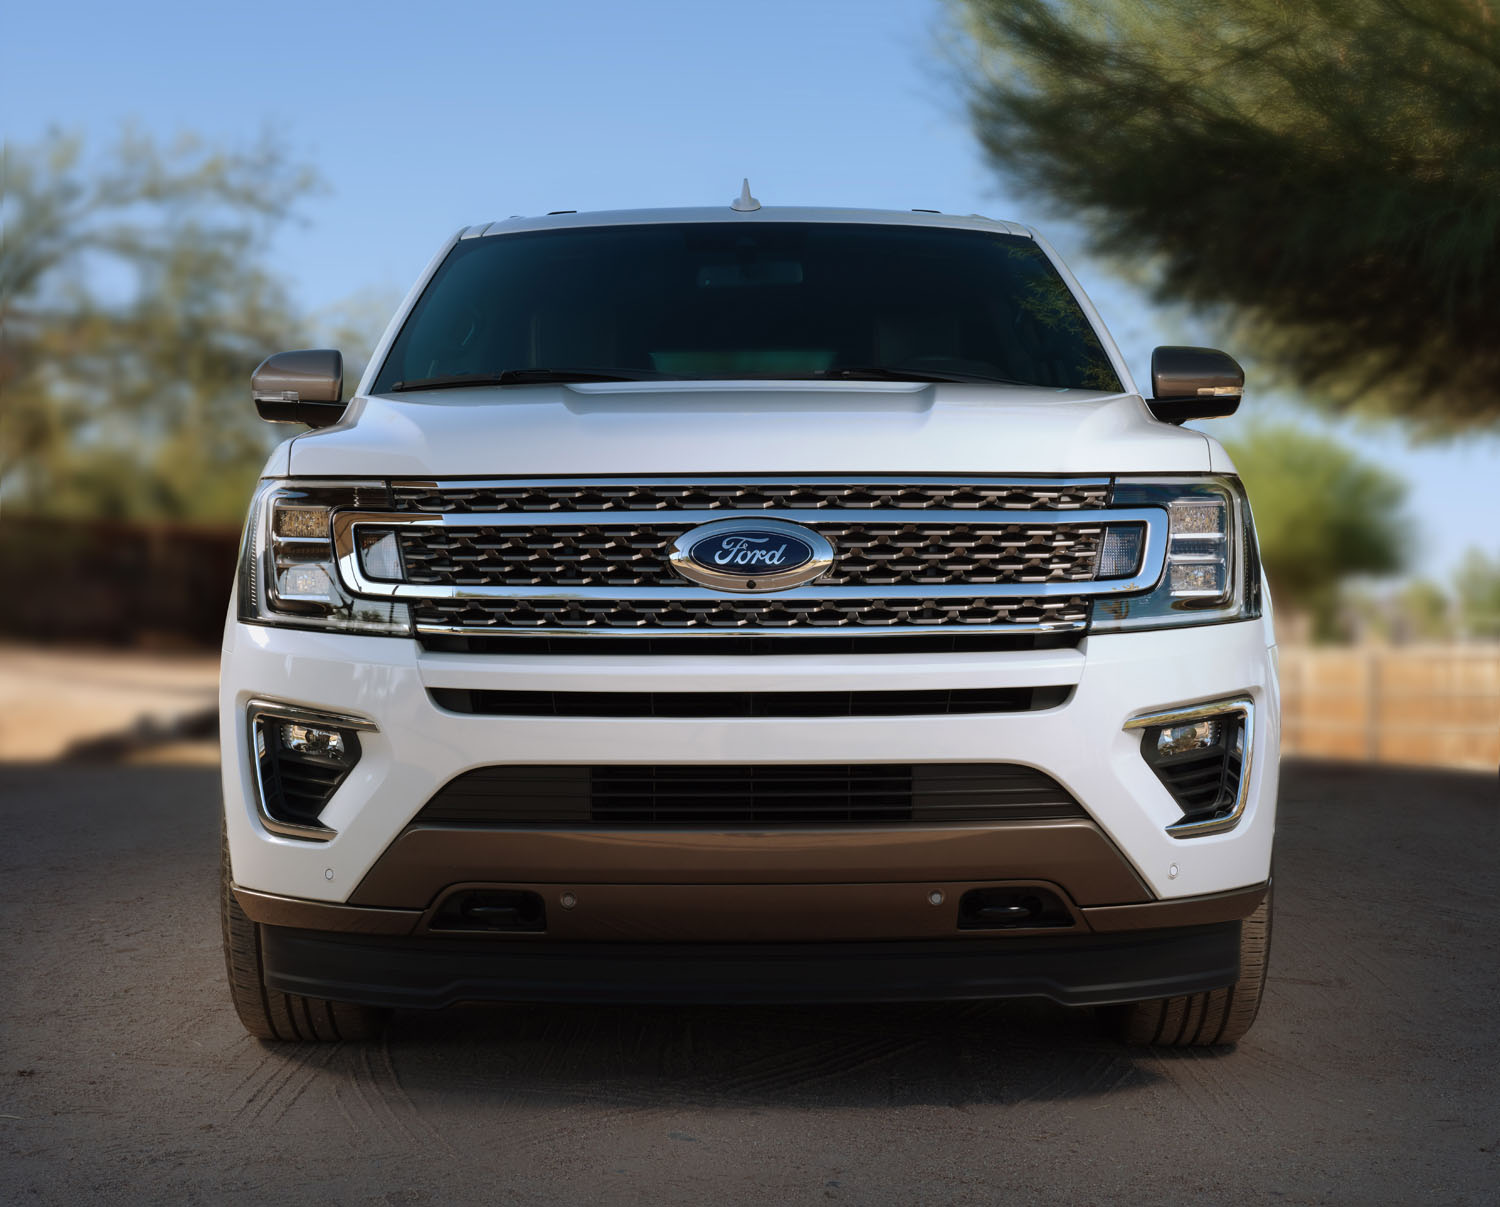 2021 order availability and lead-time? | Ford Explorer and ...